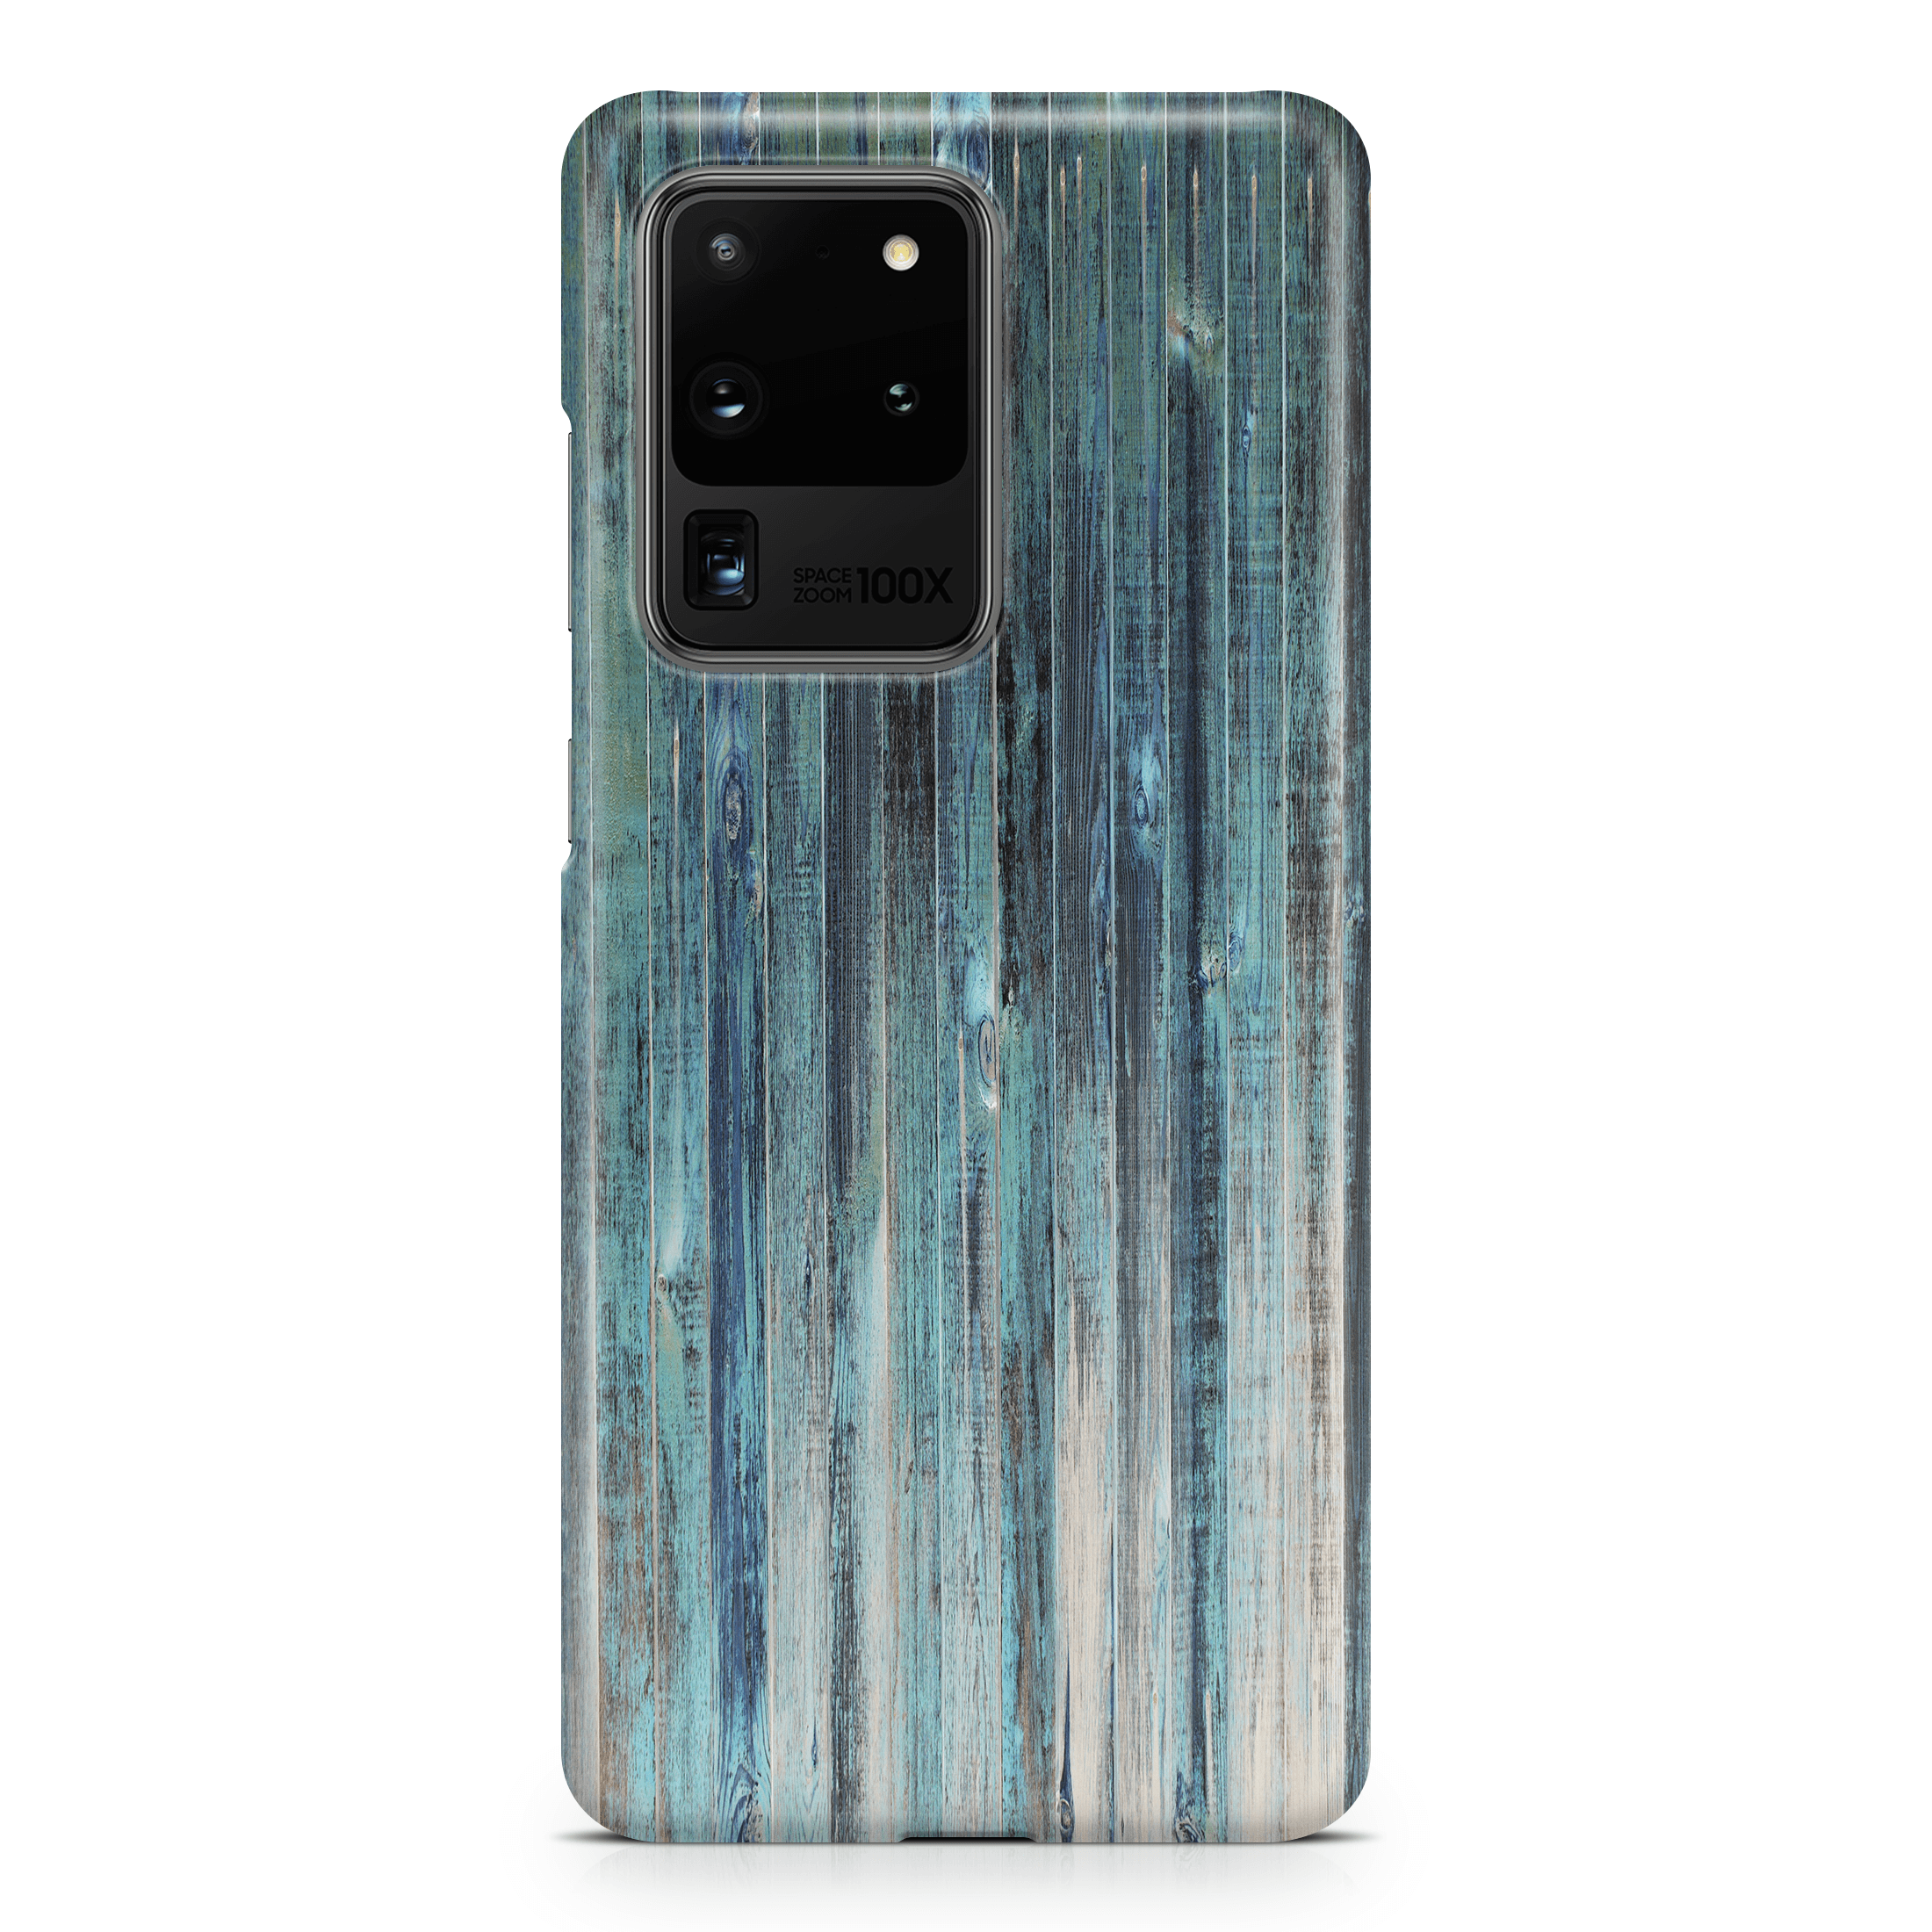 Blue Vintage Boards - Samsung phone case designs by CaseSwagger